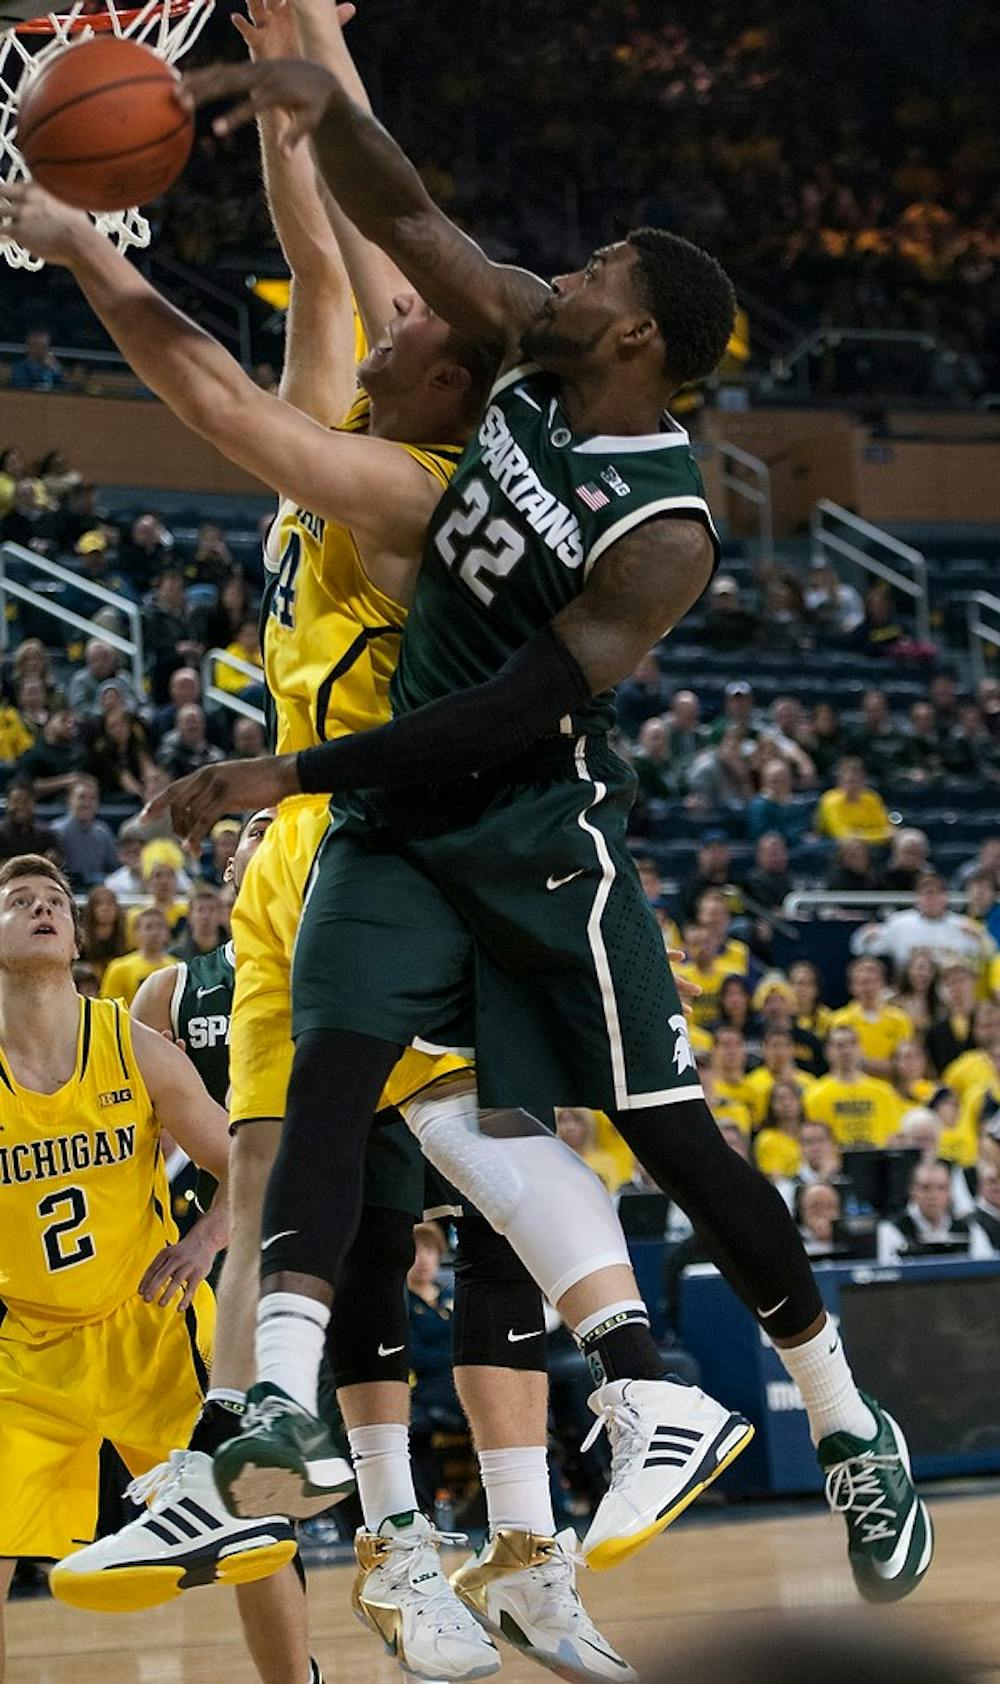 <p>Senior guard/forward Branden Dawson blocks the ball from Michigan forward Max Bielfeldt Feb. 17, 2015, during the game against Michigan at Crisler Center in Ann Arbor. The Spartans defeated the Wolverines, 80-67. Hannah Levy/The State News</p>